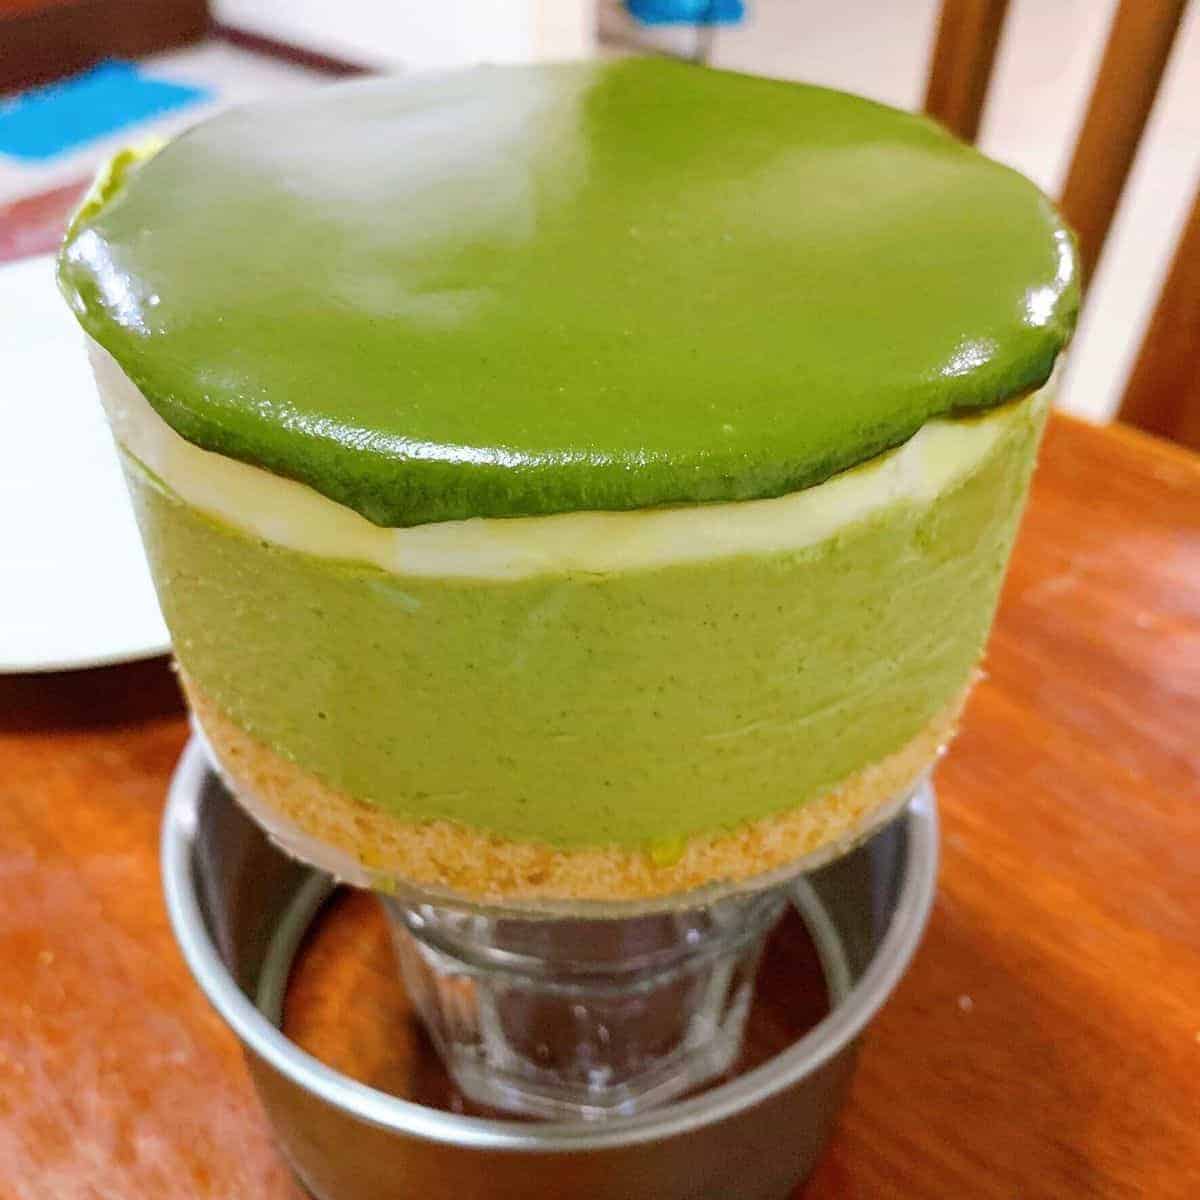 A thick layer of a baked goodie with a smooth, green ganache on top